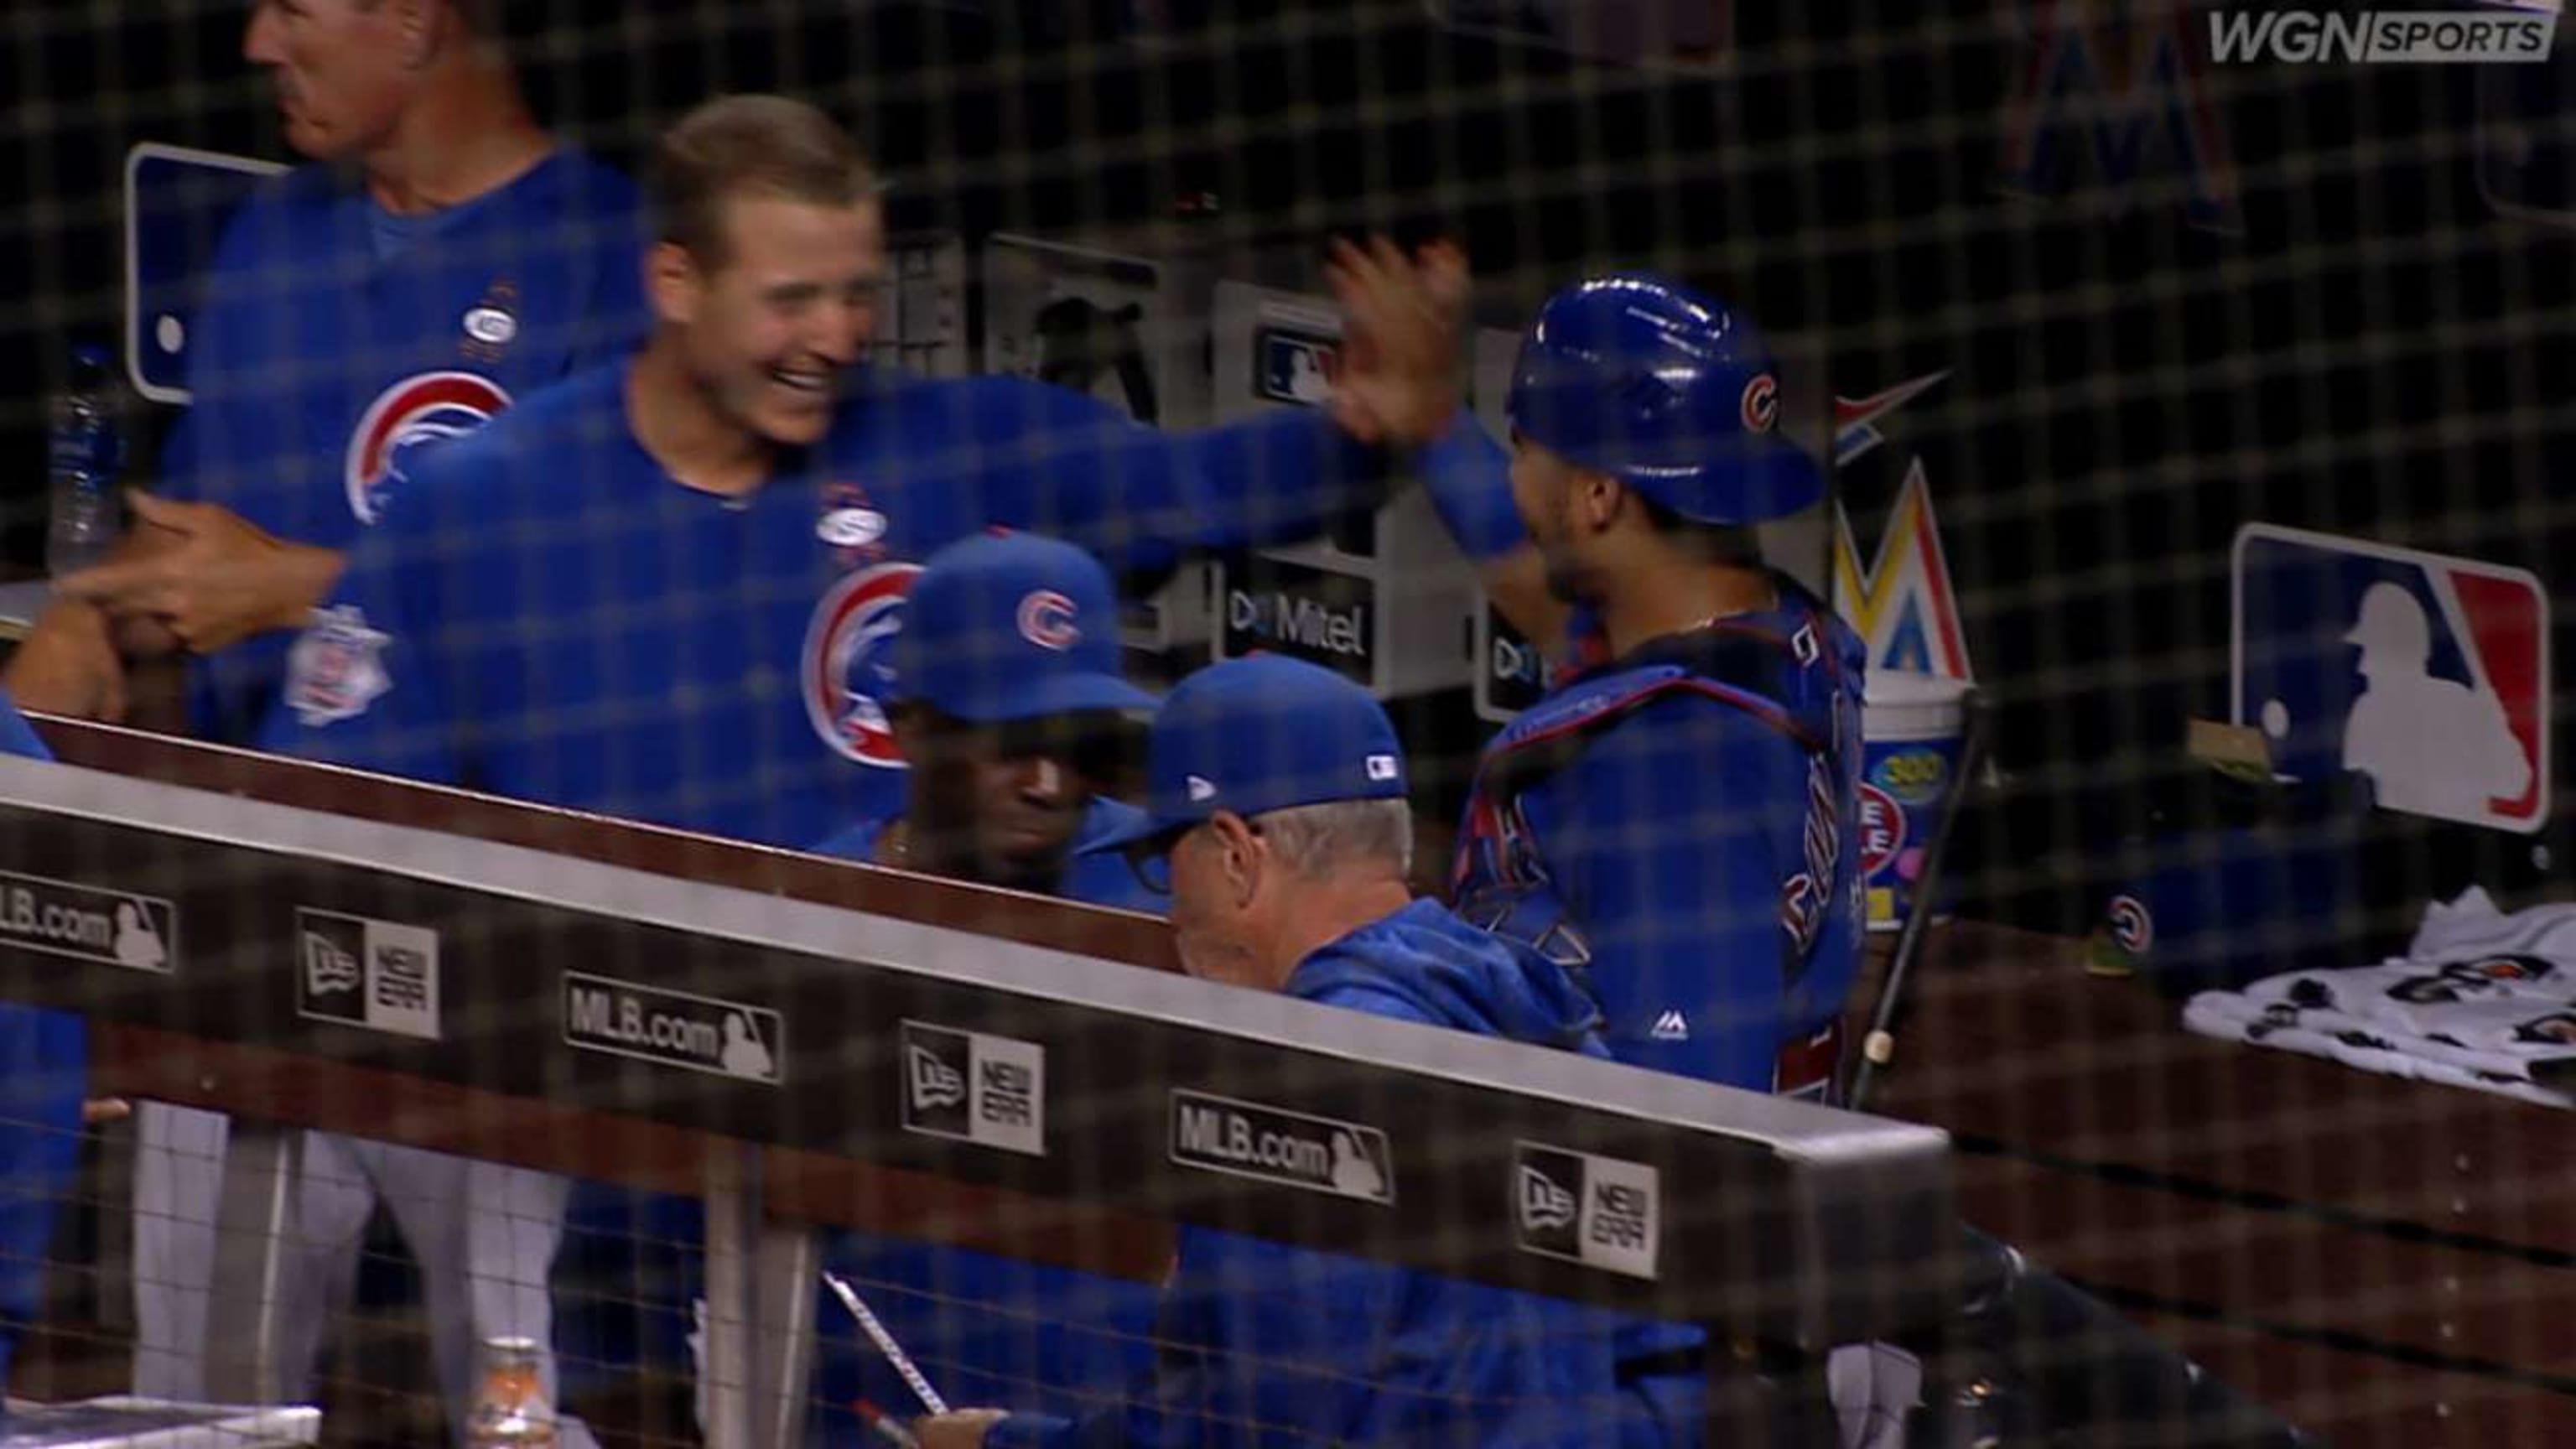 VIDEO: Willson Contreras Gets Bloody Nose After Play At The Plate